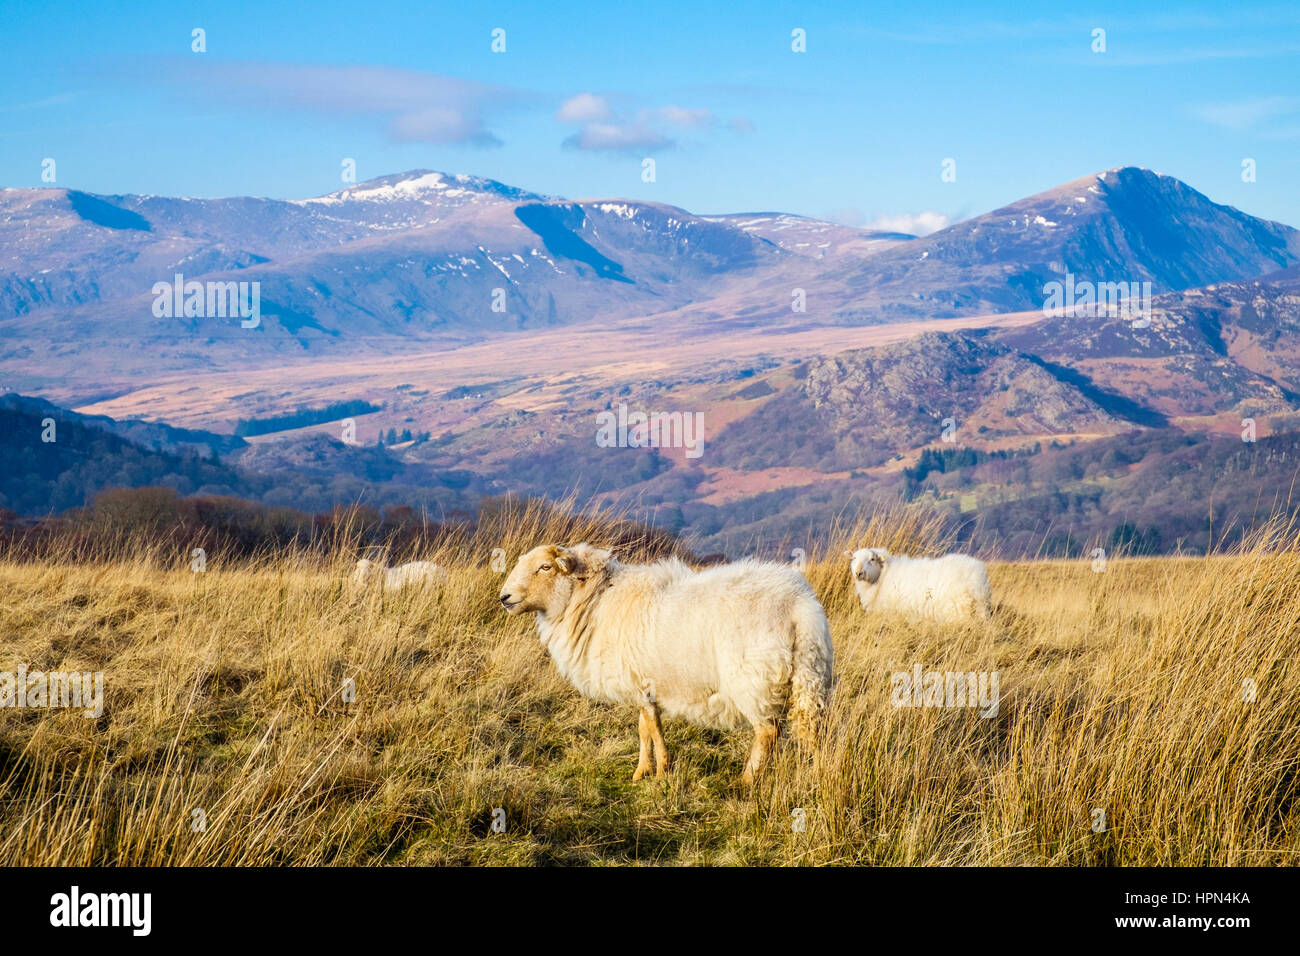 Welsh sheep in country side on moorland hillfarm in mountains of Snowdonia National Park with Carneddau in distance. North Wales, UK, Britain. Stock Photo